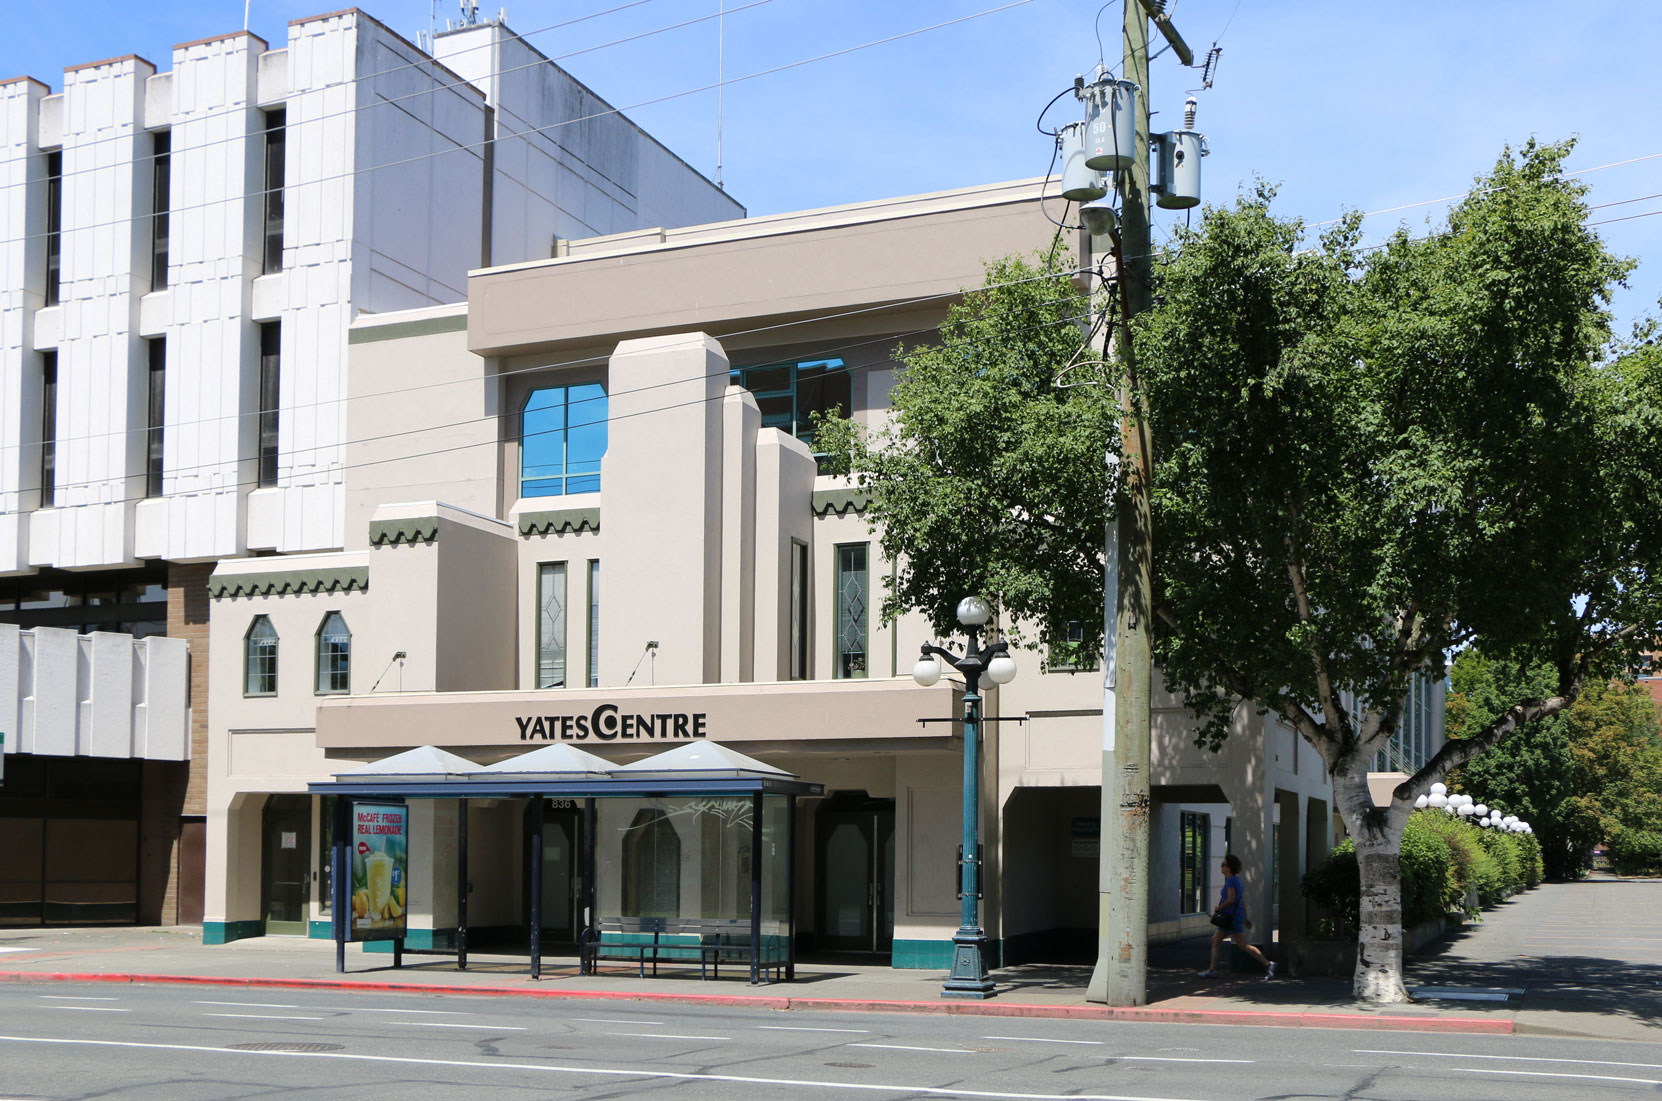 838 Yates Street, originally built in 1936 as the Atlas Theatre (photo; Victoria Online Sightseeing Tours)